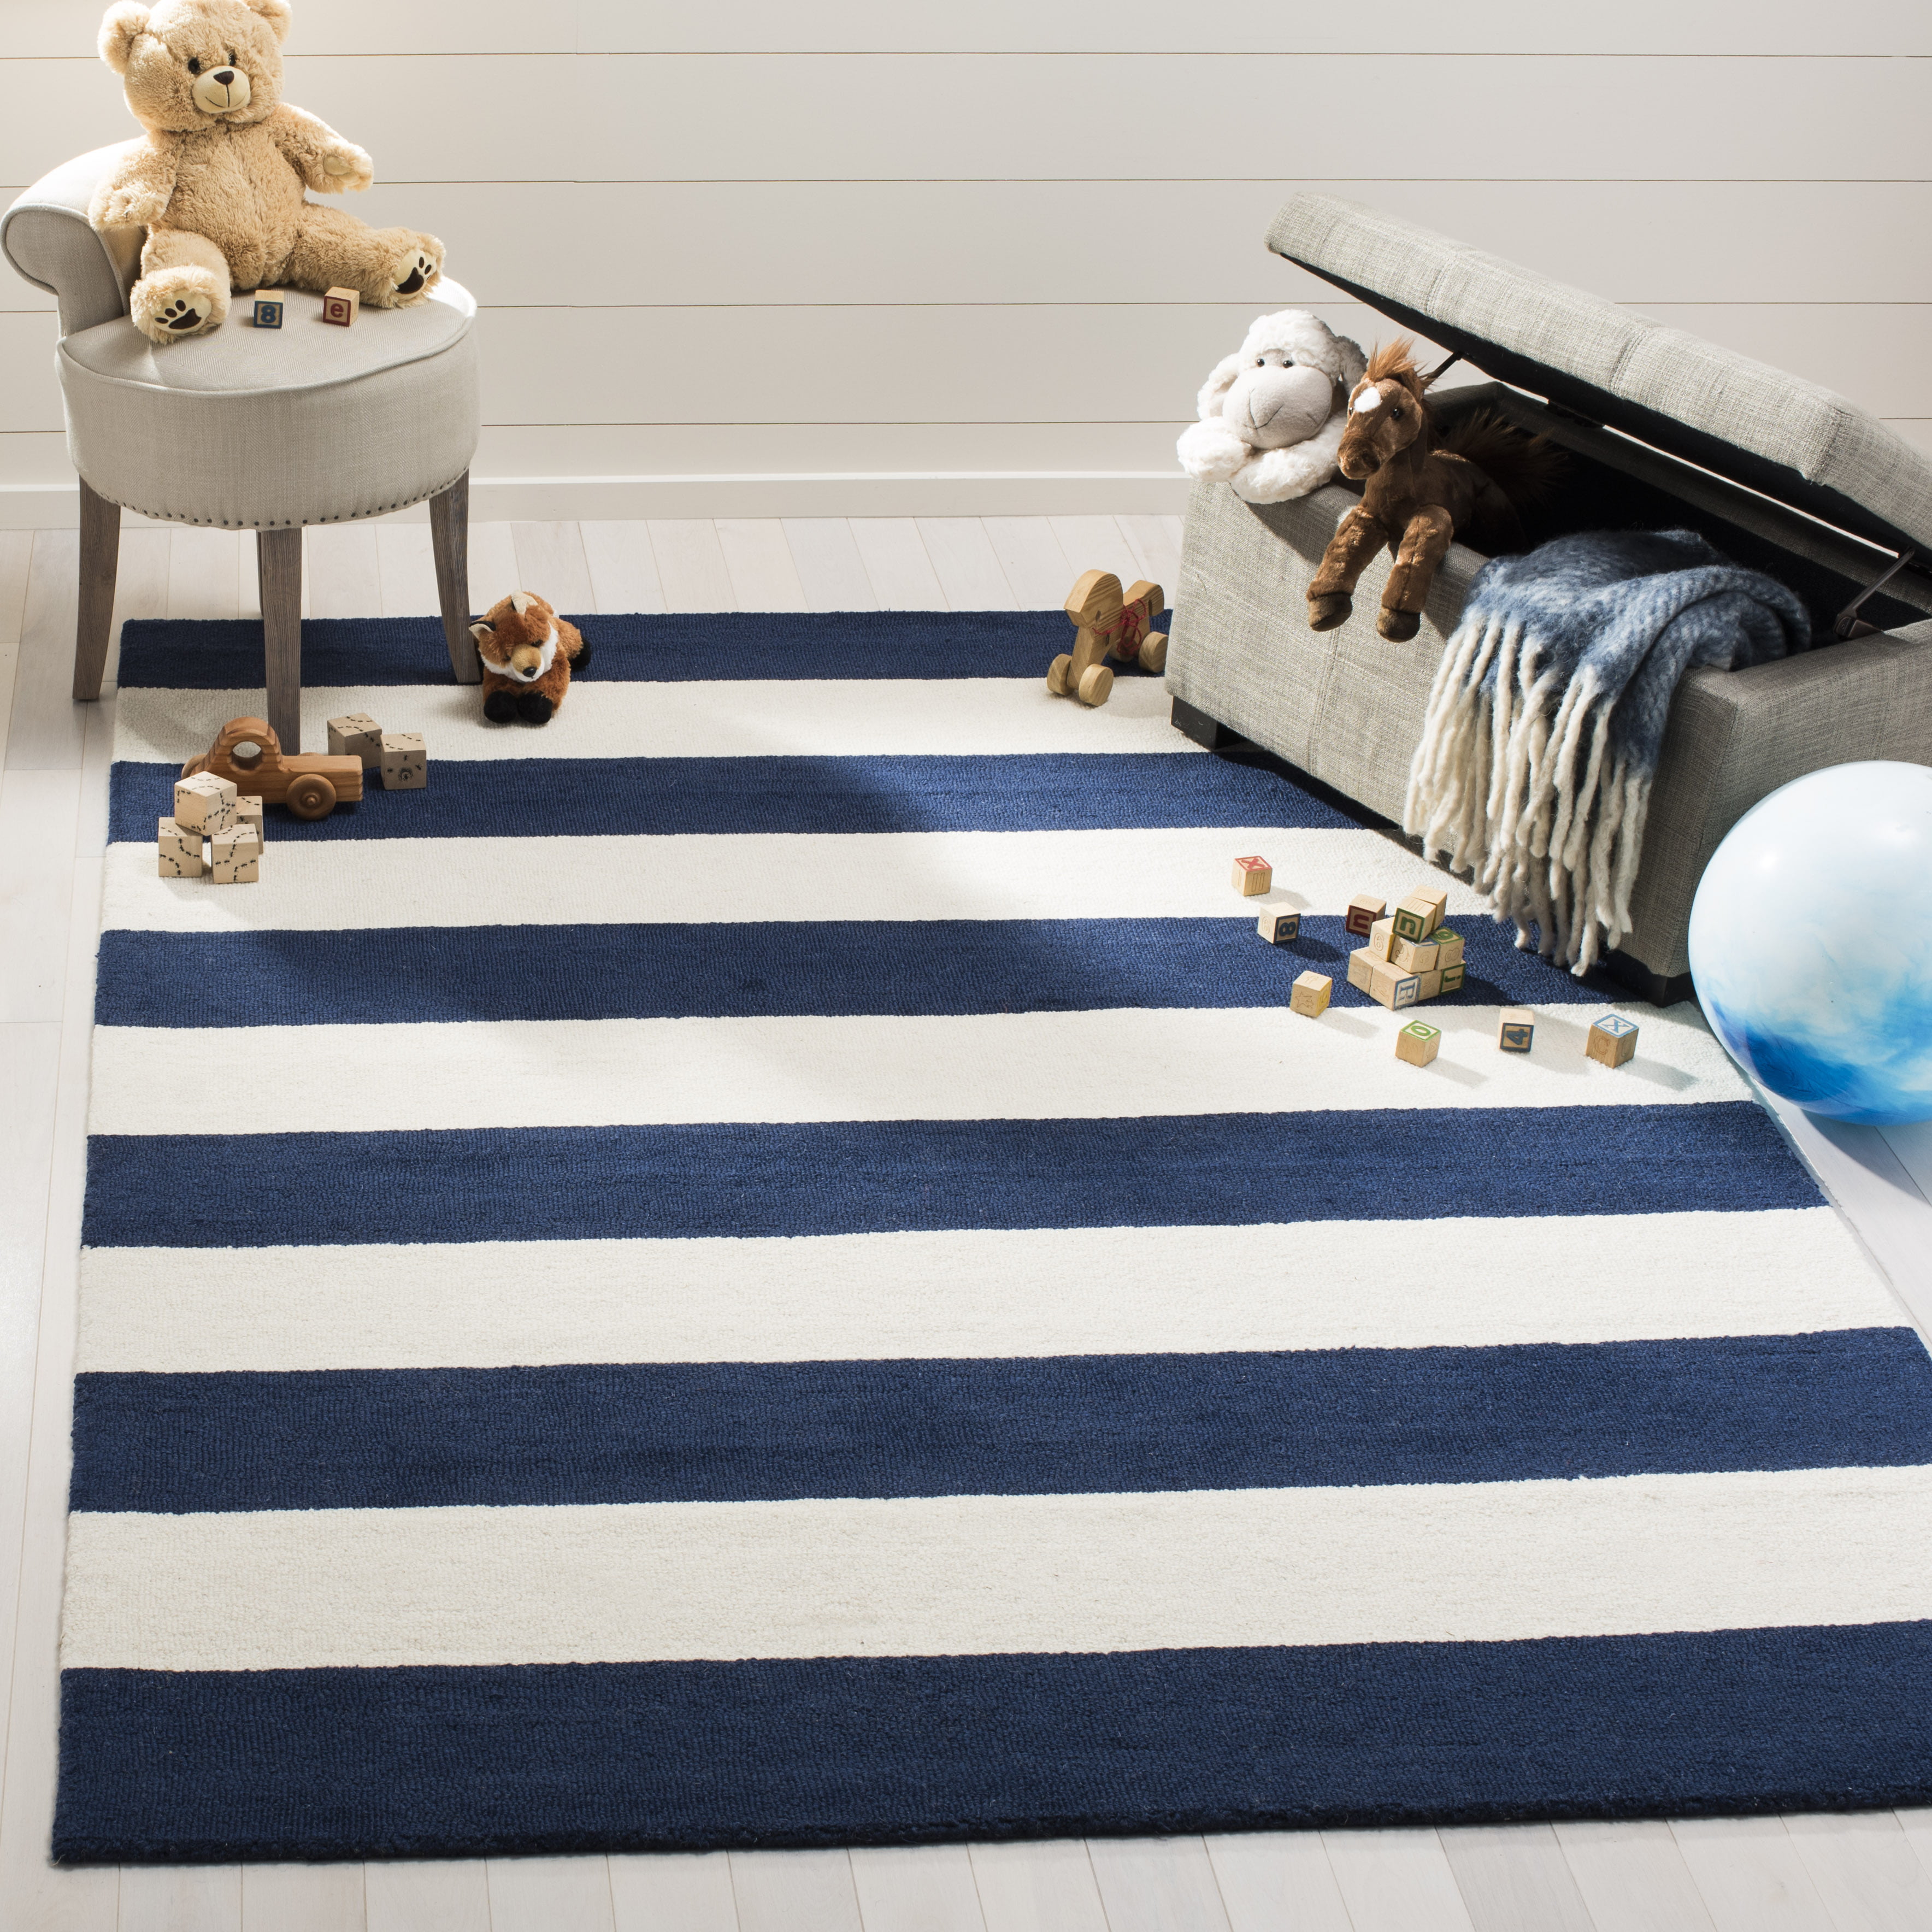 Safavieh Kids Rugby Striped Wool Area, Navy Blue Striped Rug